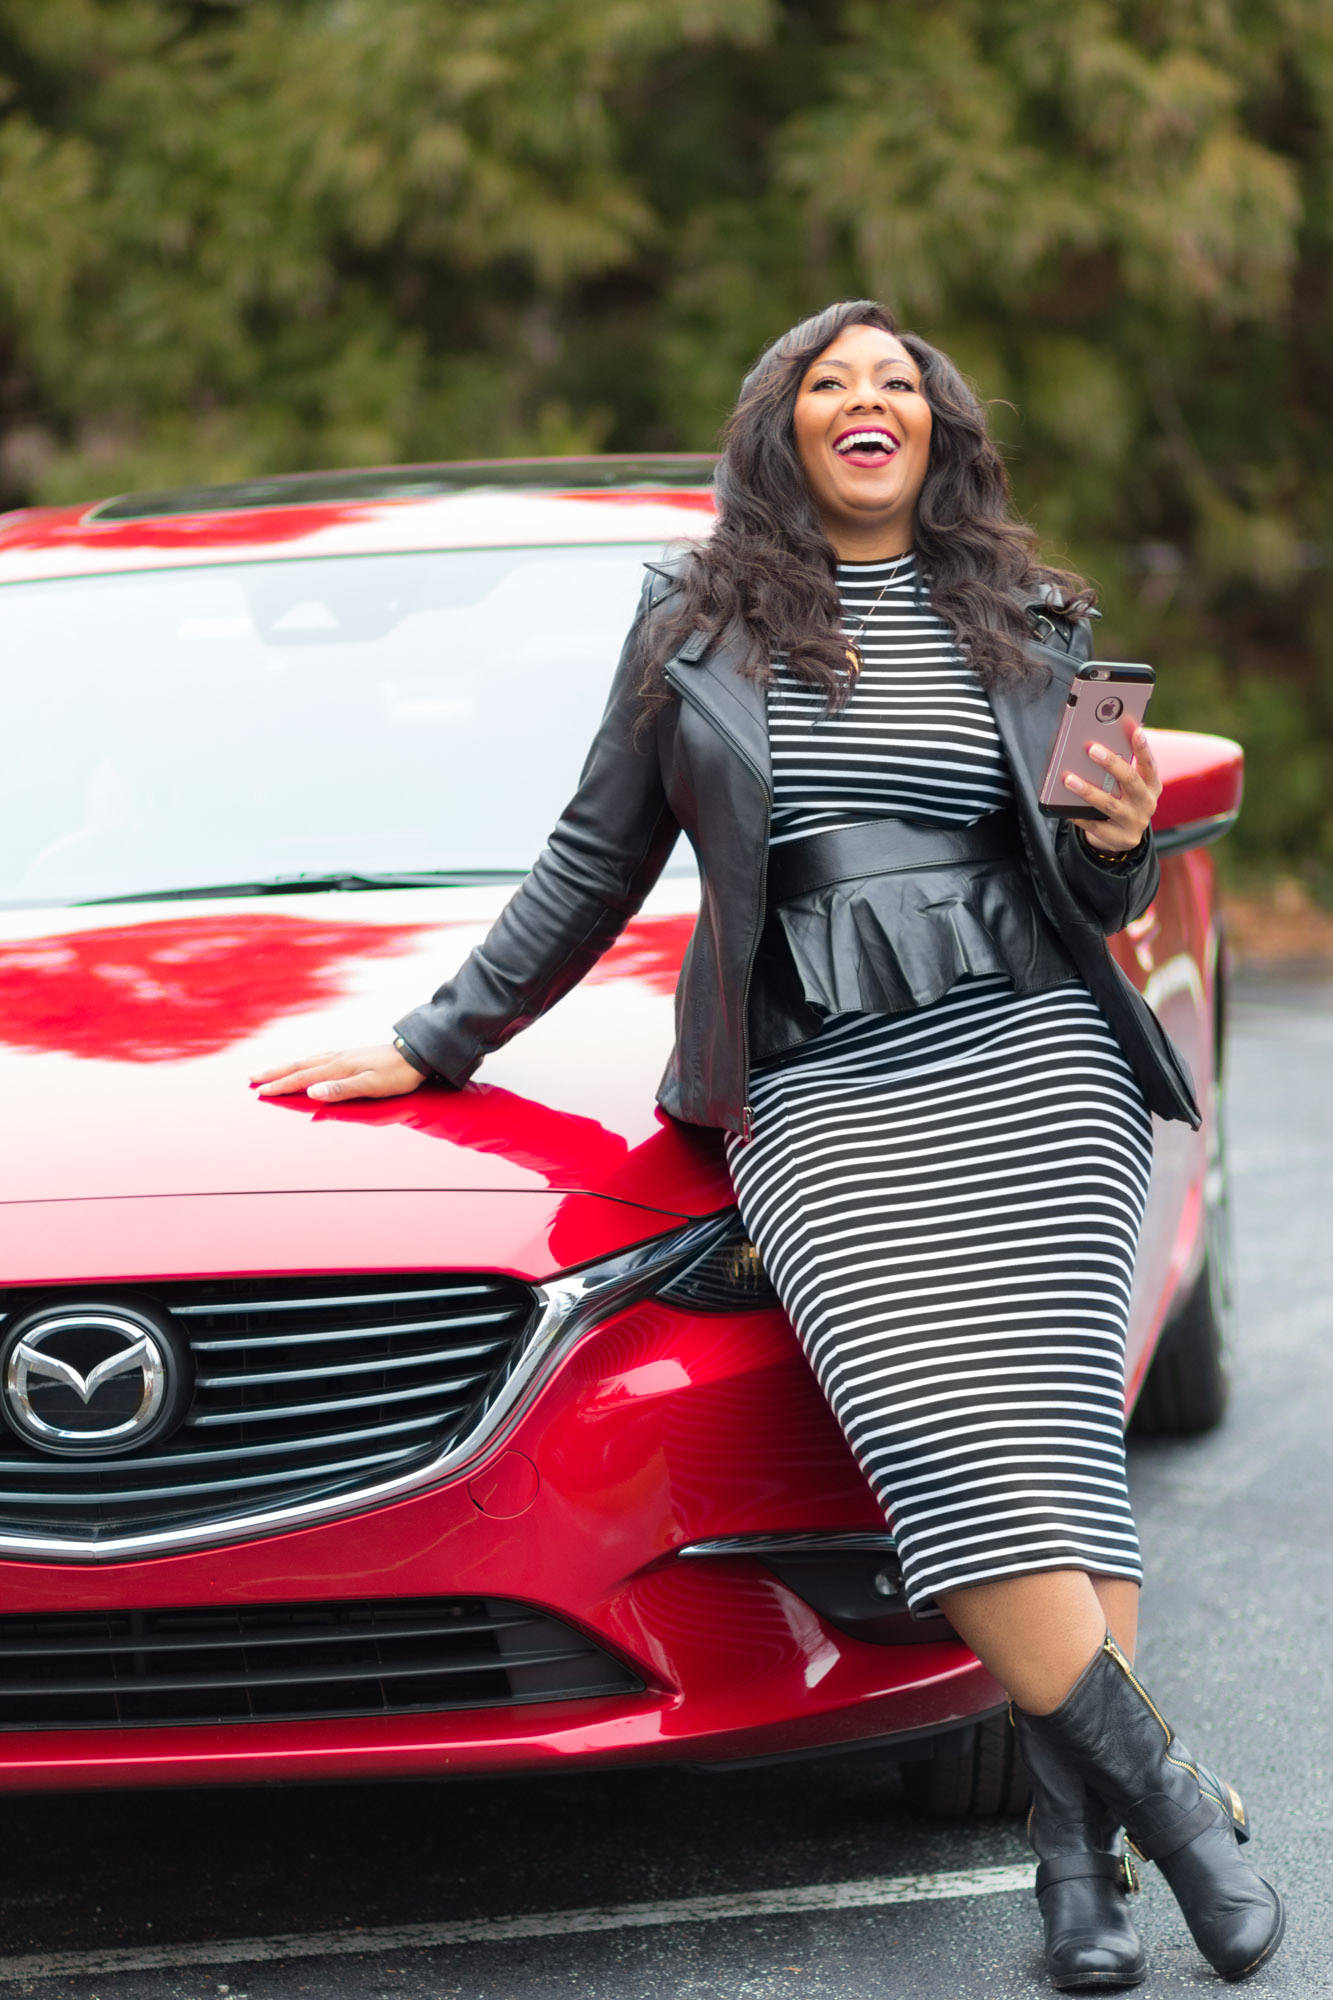 The 2017 Mazda 6 Was Made for Women Like Me